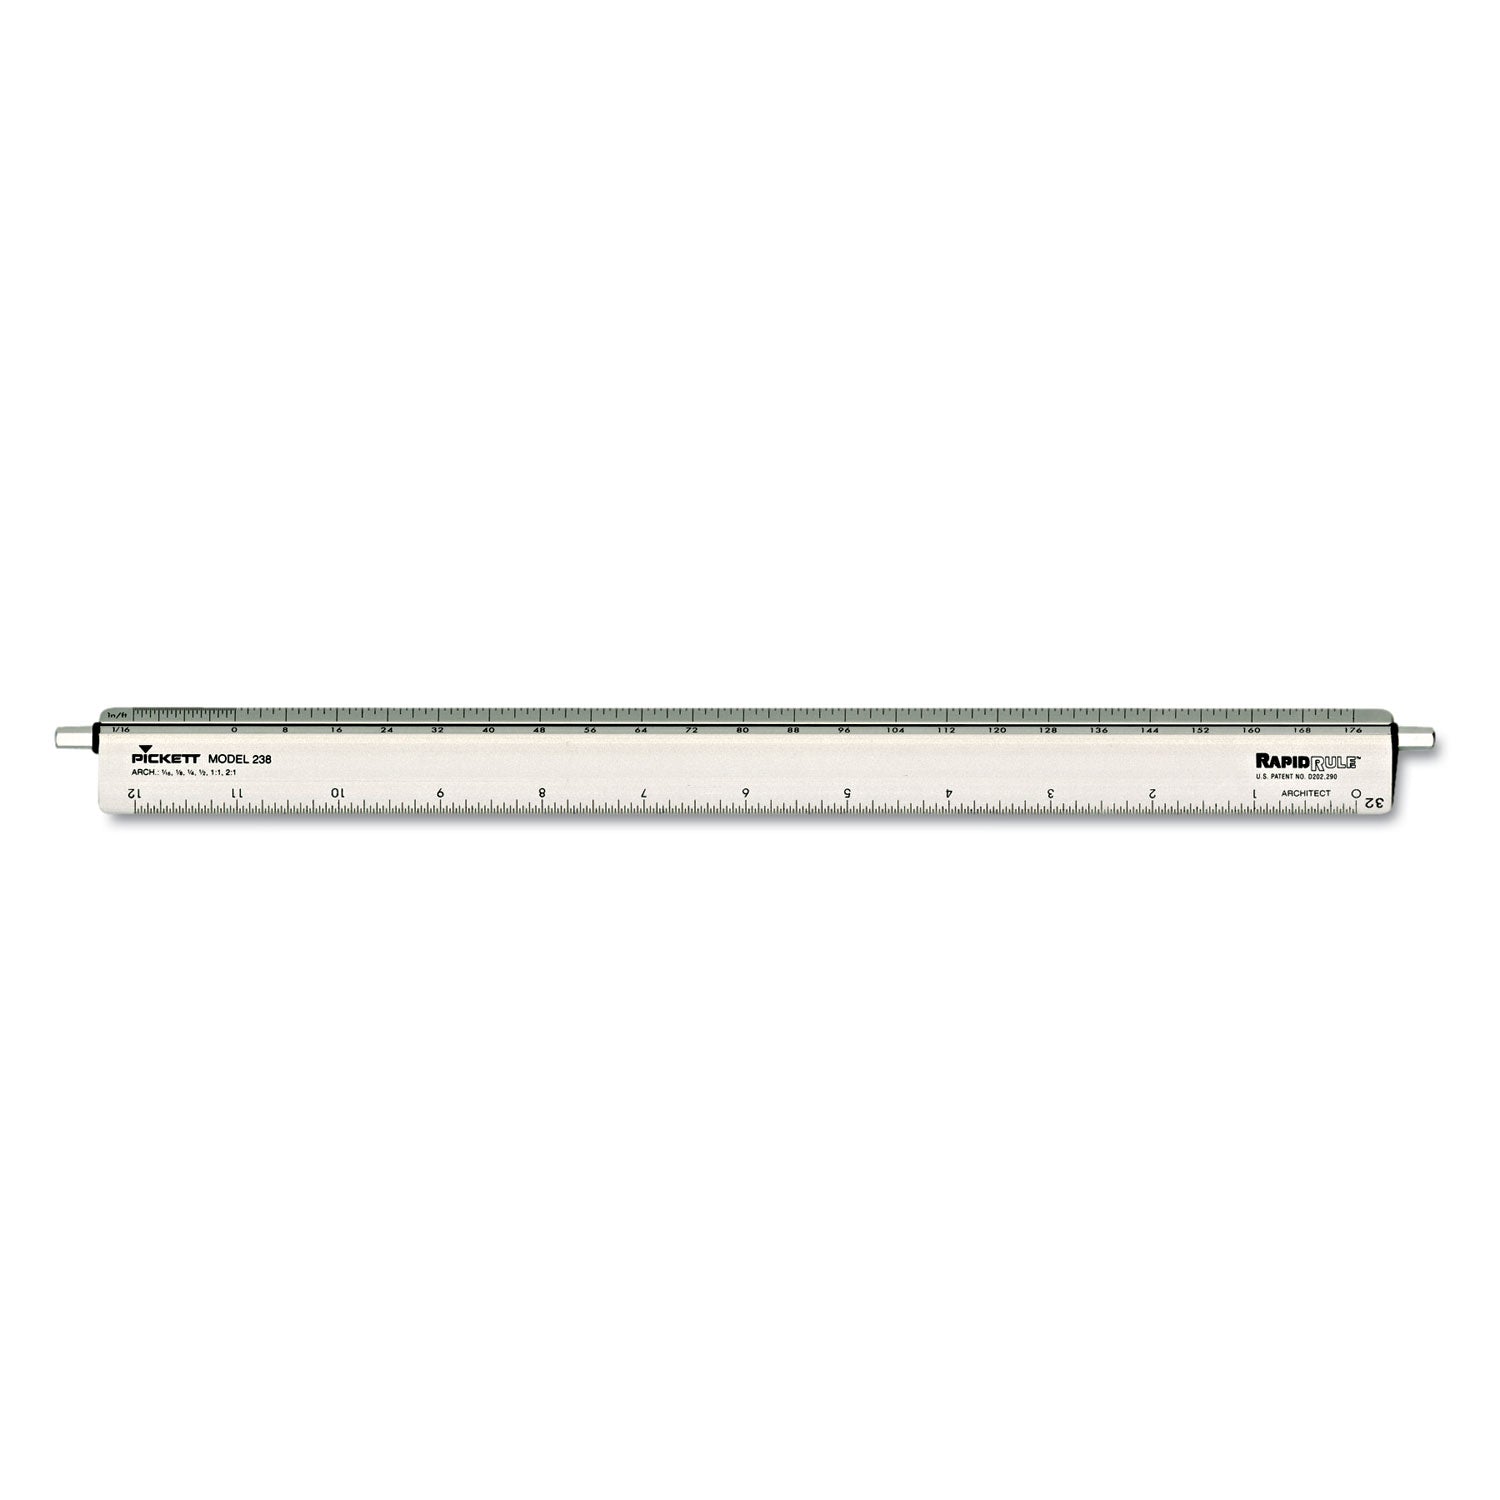 Adjustable Triangular Scale Aluminum Architects Ruler, 12" Long, Silver - 